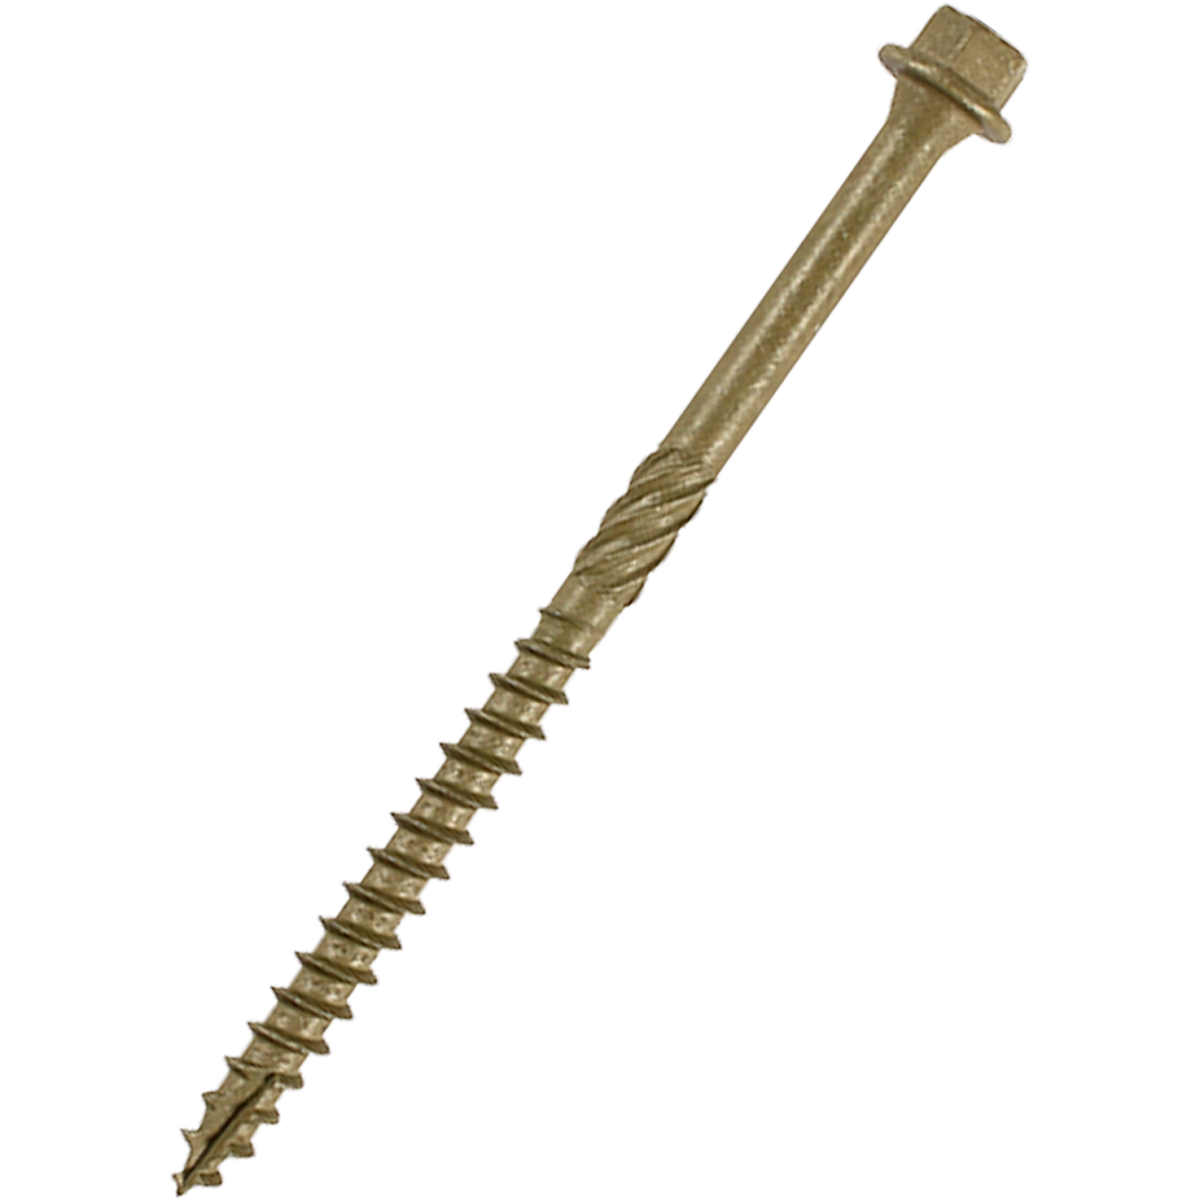 A range of Timco in-dex hex head timber screws with a green exterior, available in various diameters and lengths at competitive prices